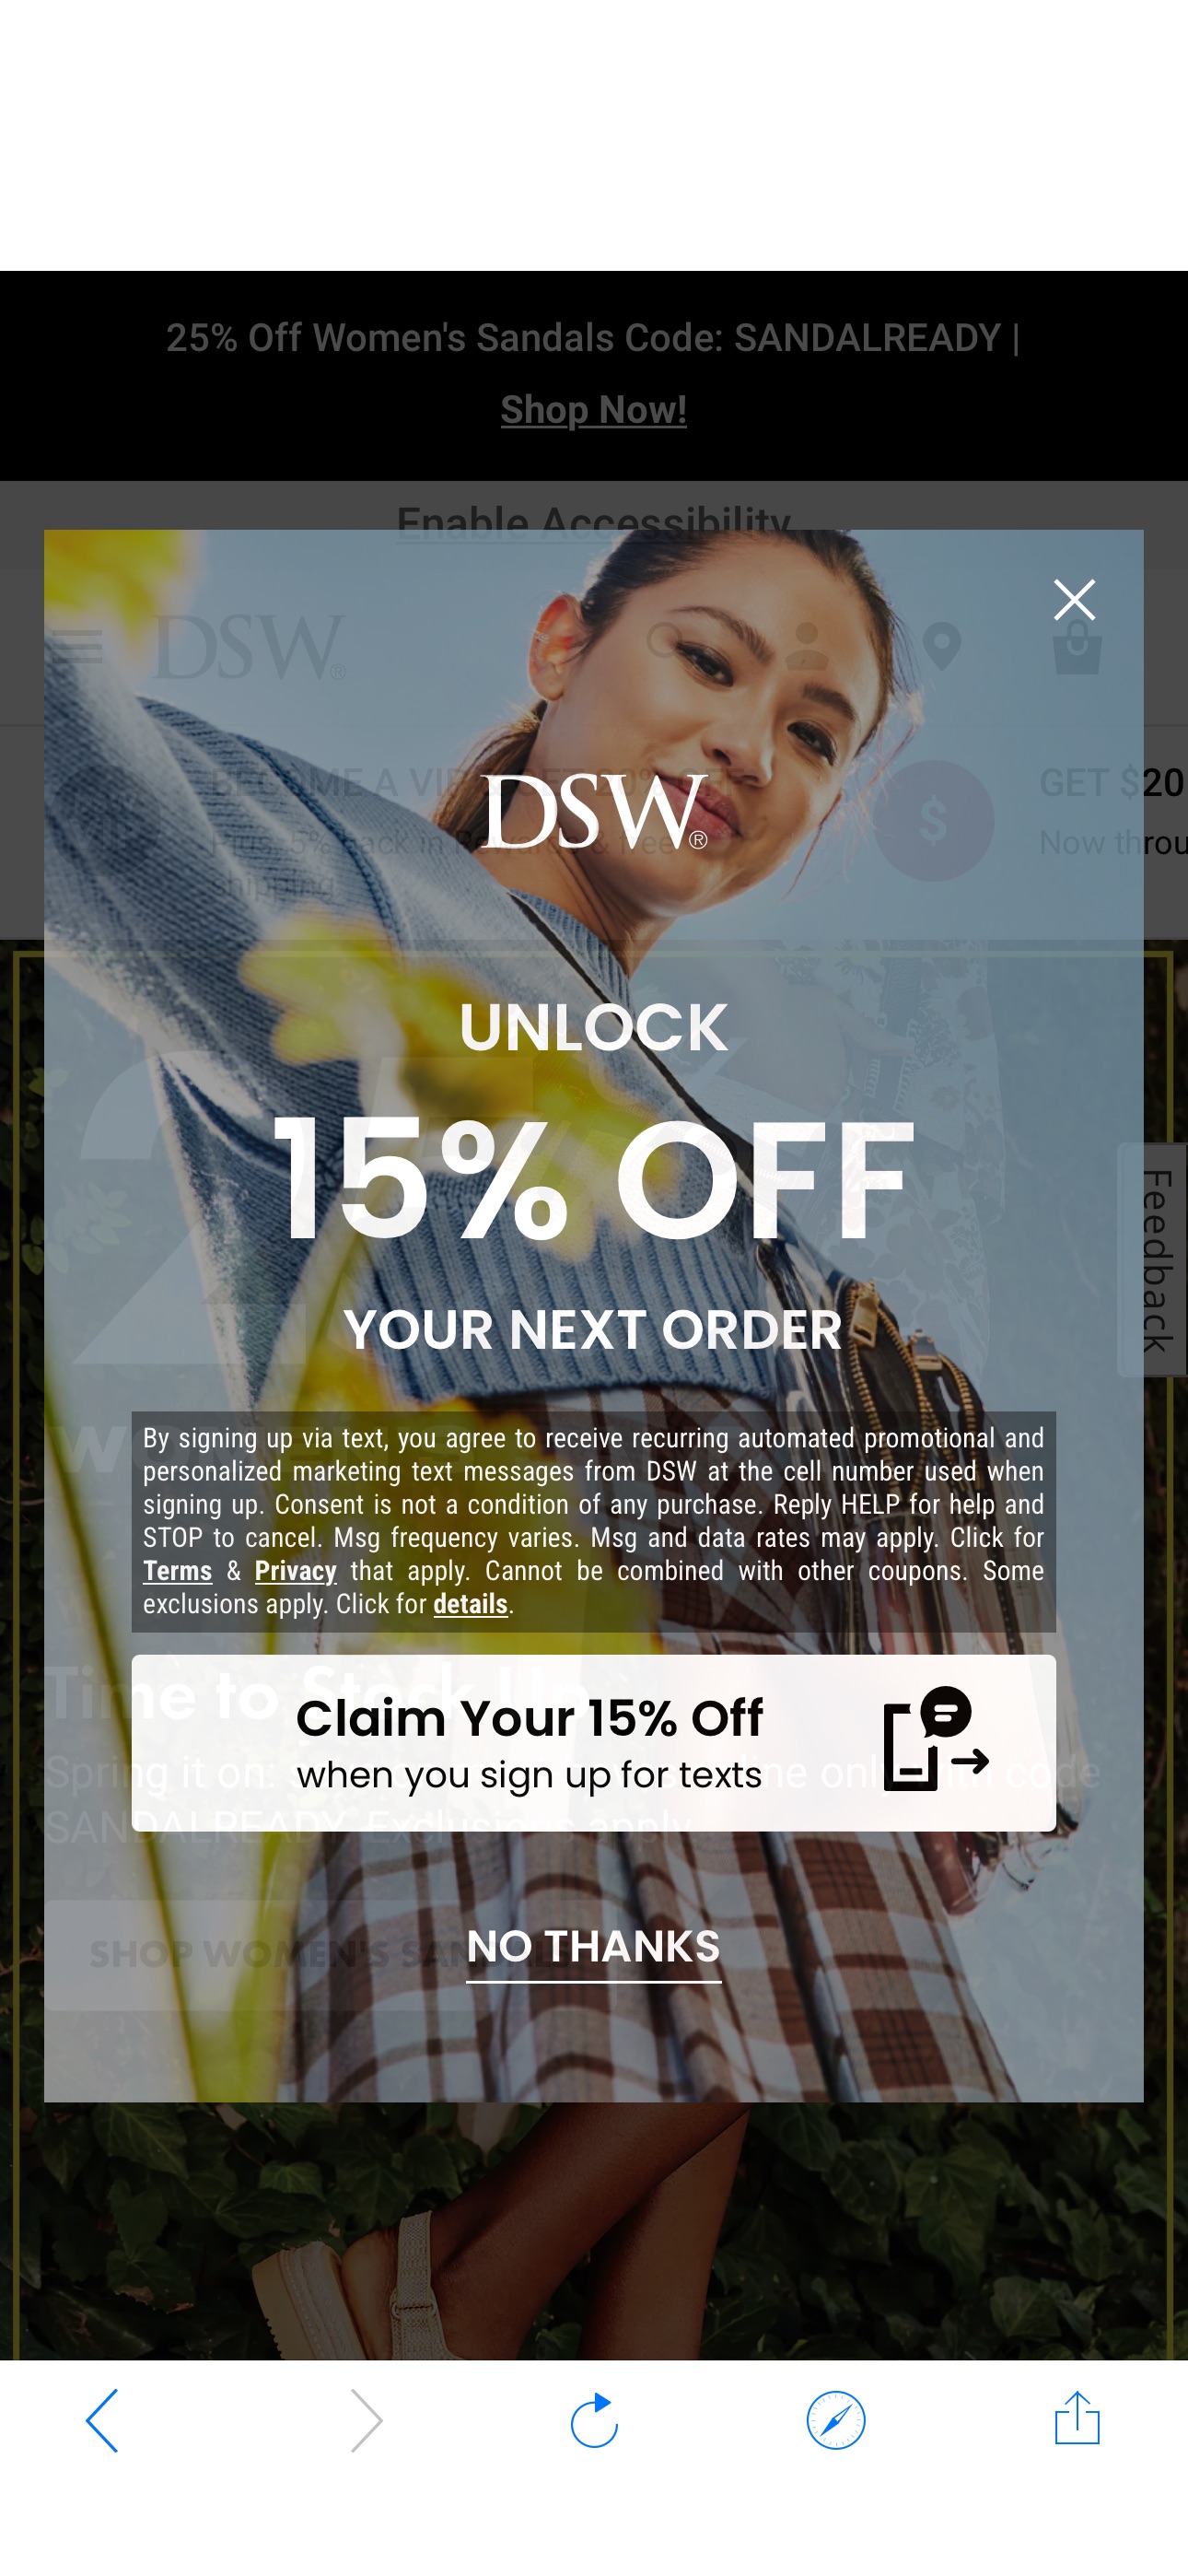 Shoes: Women's, Men's & Kids Shoes from Top Brands | DSW 25% off Women’s Sandals with code: SANDALREADY
Plus, earn $20 in DSW dollars when you spend $75 or more.